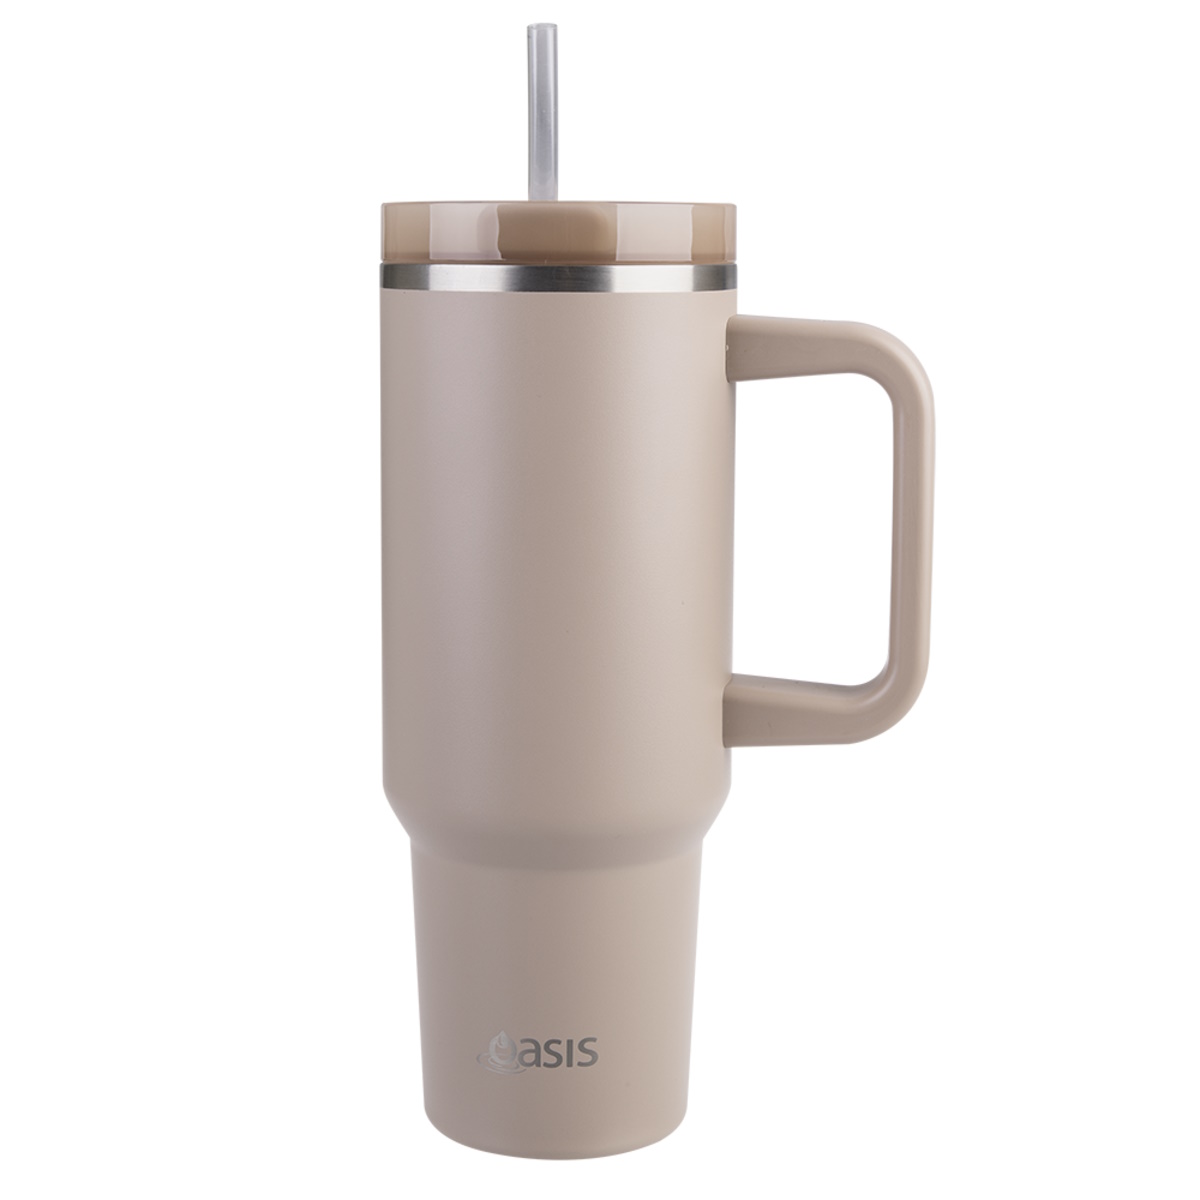  Oasis Stainless Steel Double Wall Insulated Commuter Travel Tumbler 1.2l - Latte